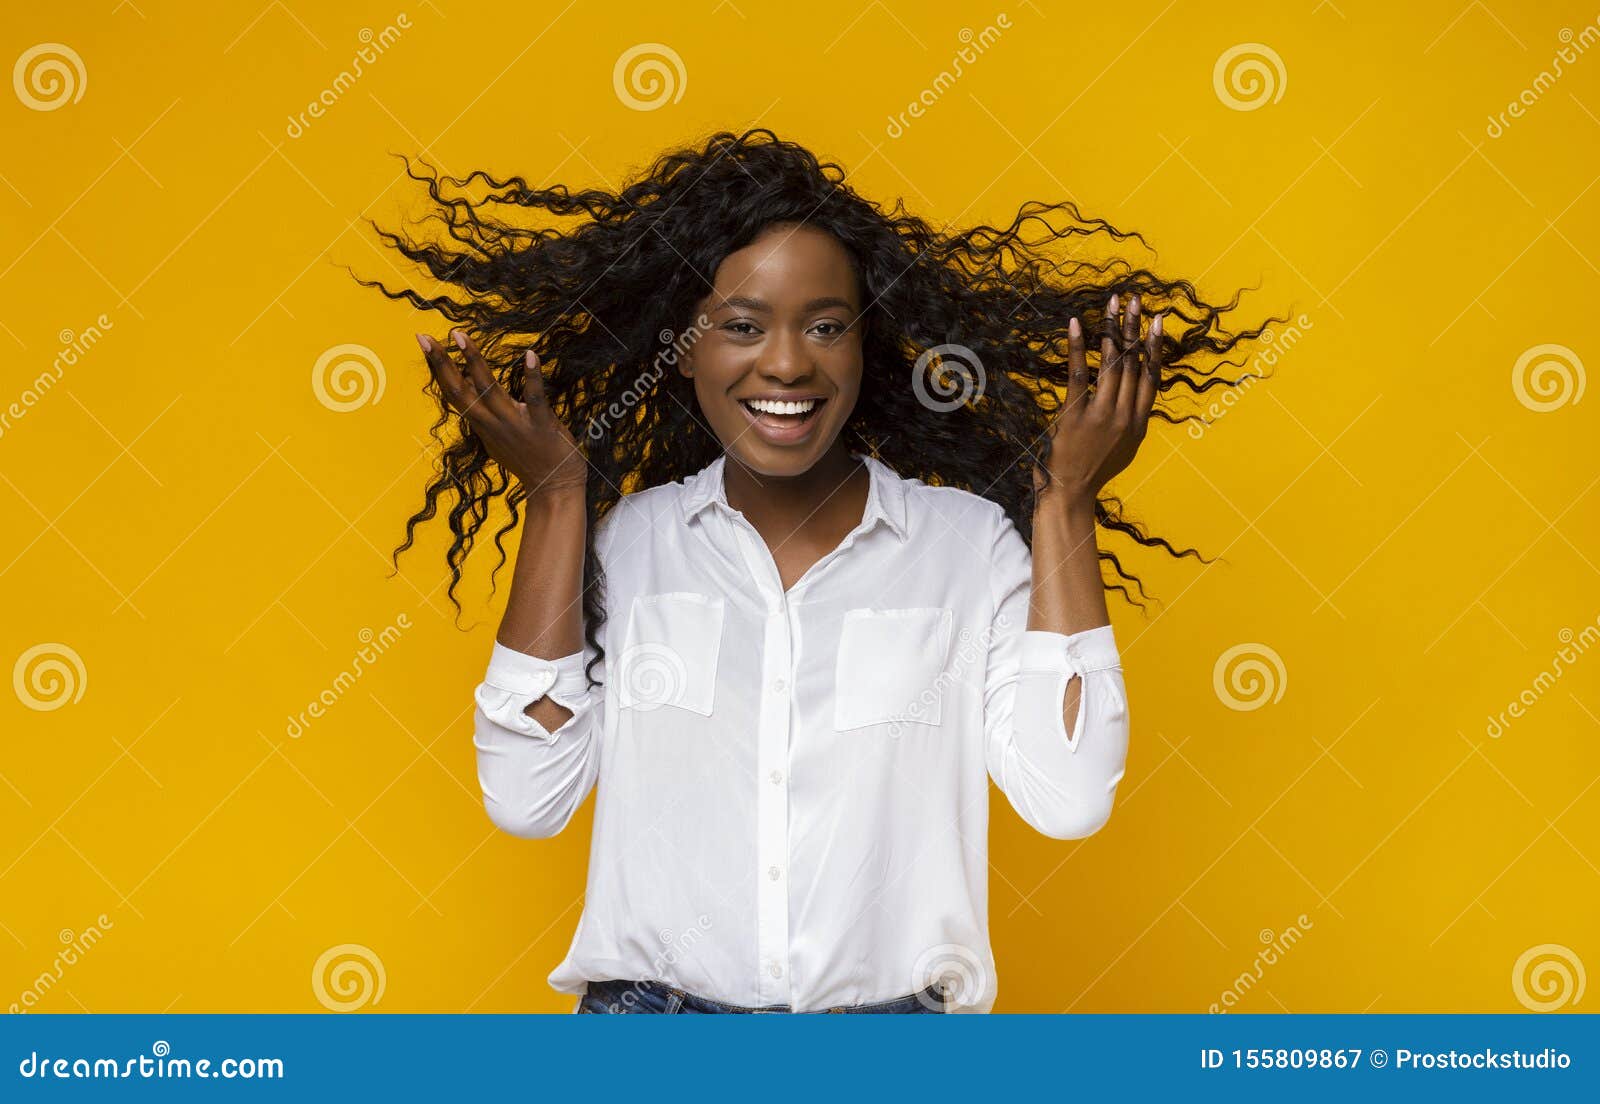 Cheerful African American Young Girl With Flying Curly Hair